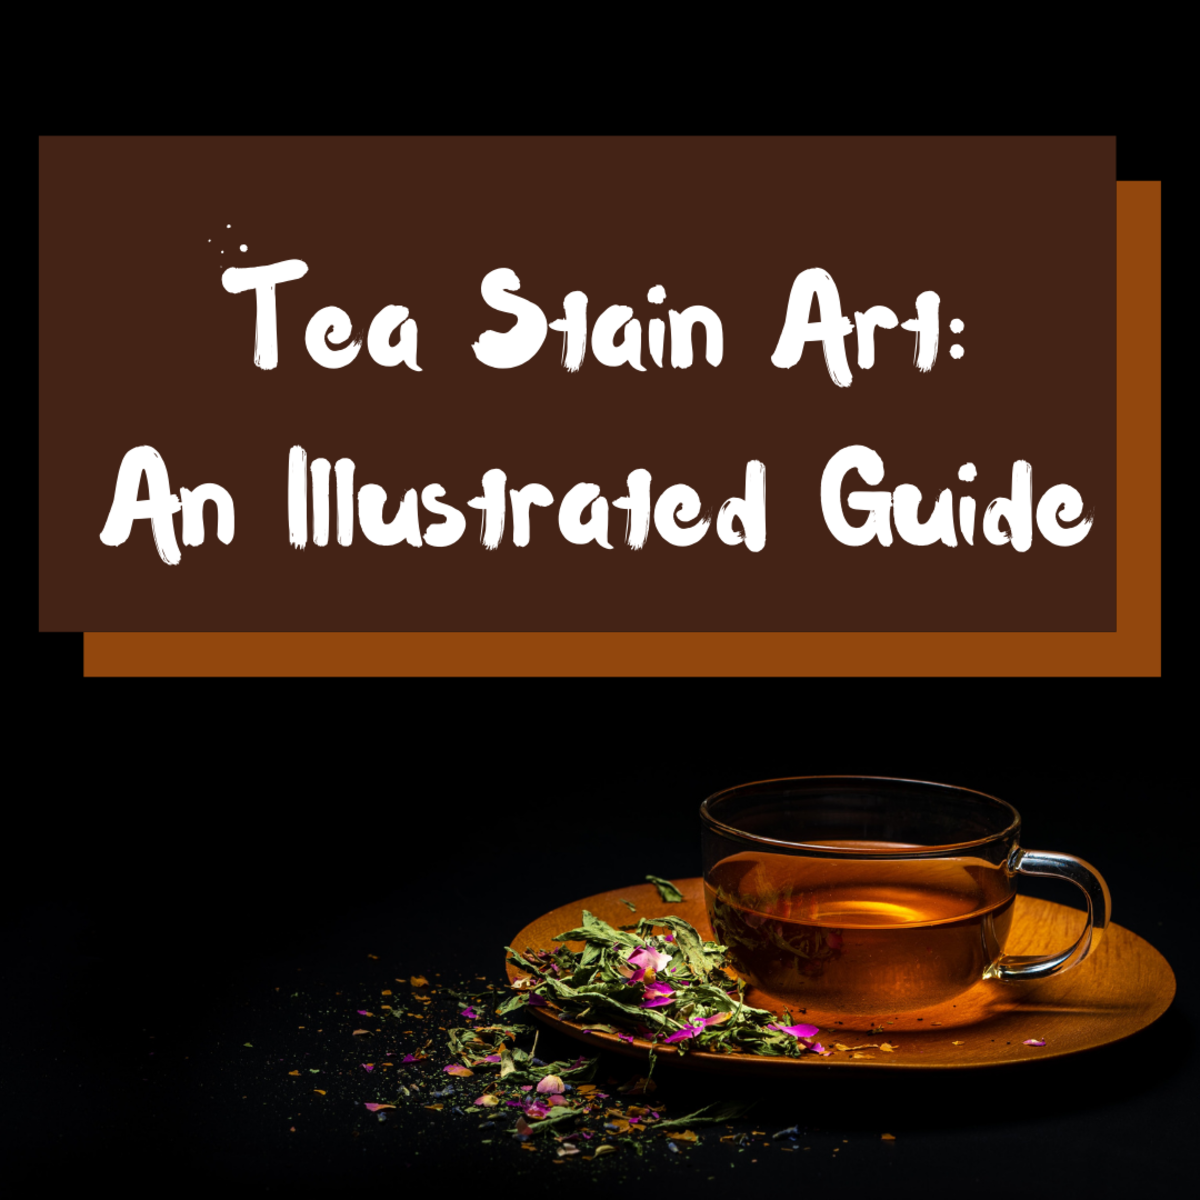 How to Make Tea Stain Art: An Illustrated Guide